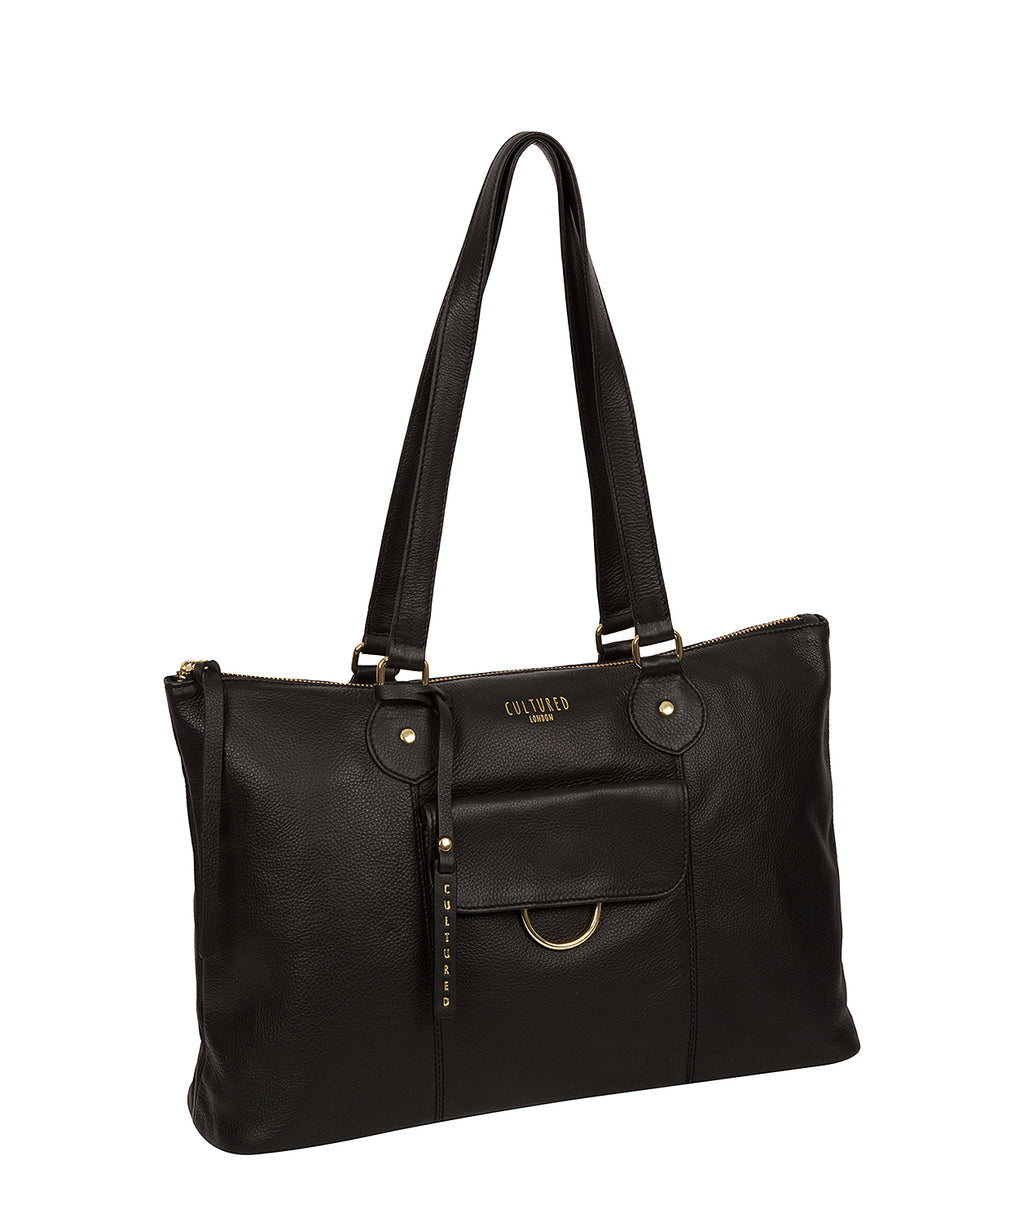 Black Leather Tote Bag 'Bayswater' by Cultured London – Pure Luxuries ...